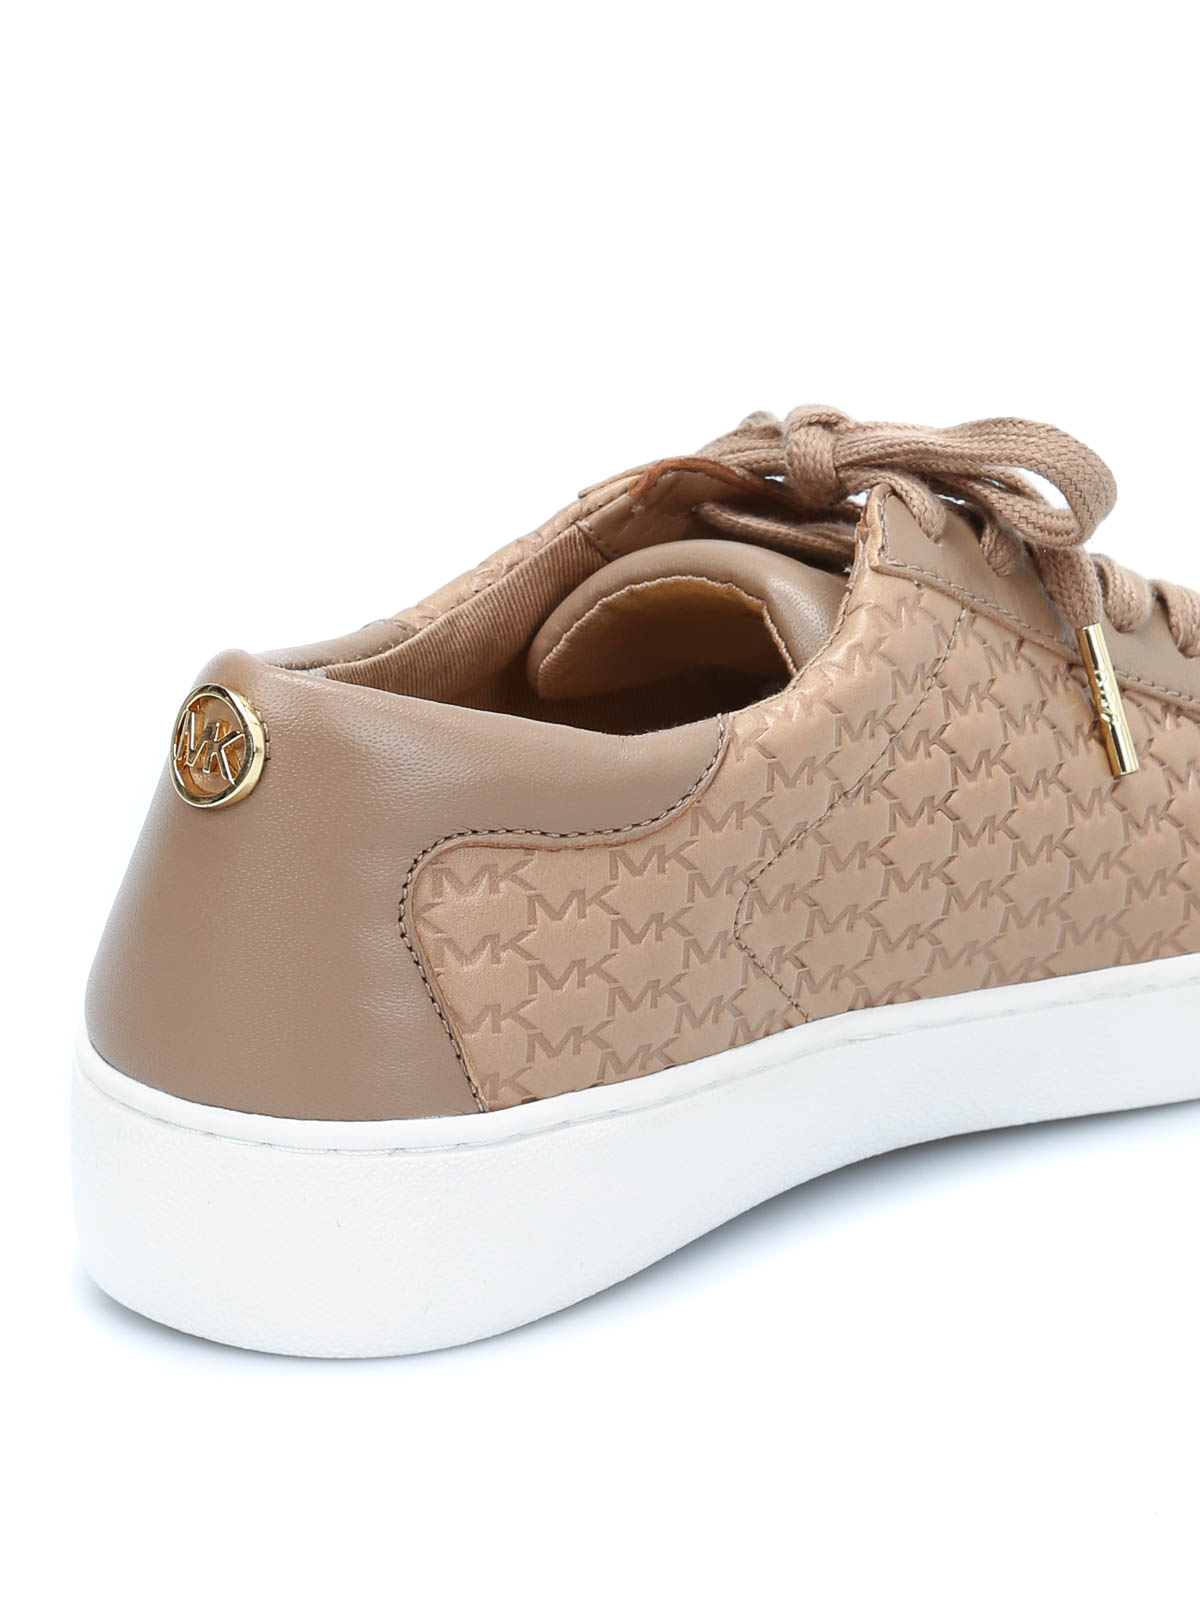 Trainers Michael Kors - Colby leather sneakers - 43R5COFP2L185 